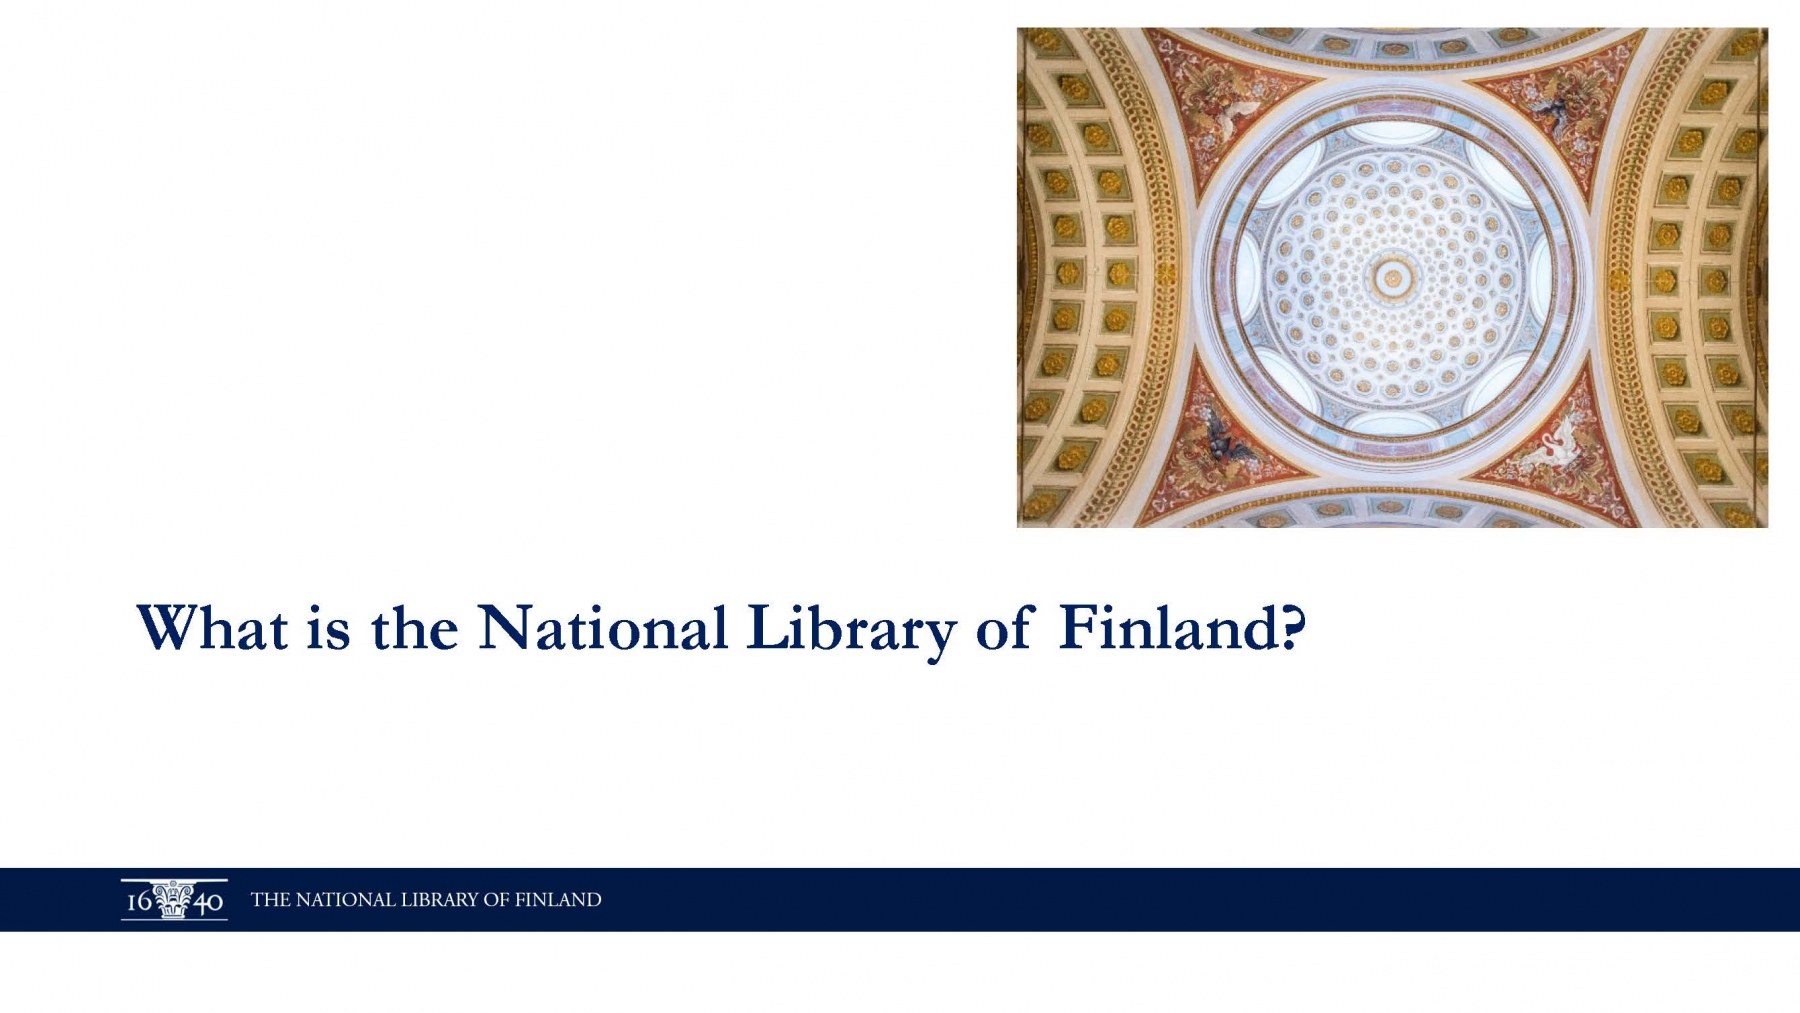 National Library of Finland (pres. by Mikko Lappalainen)